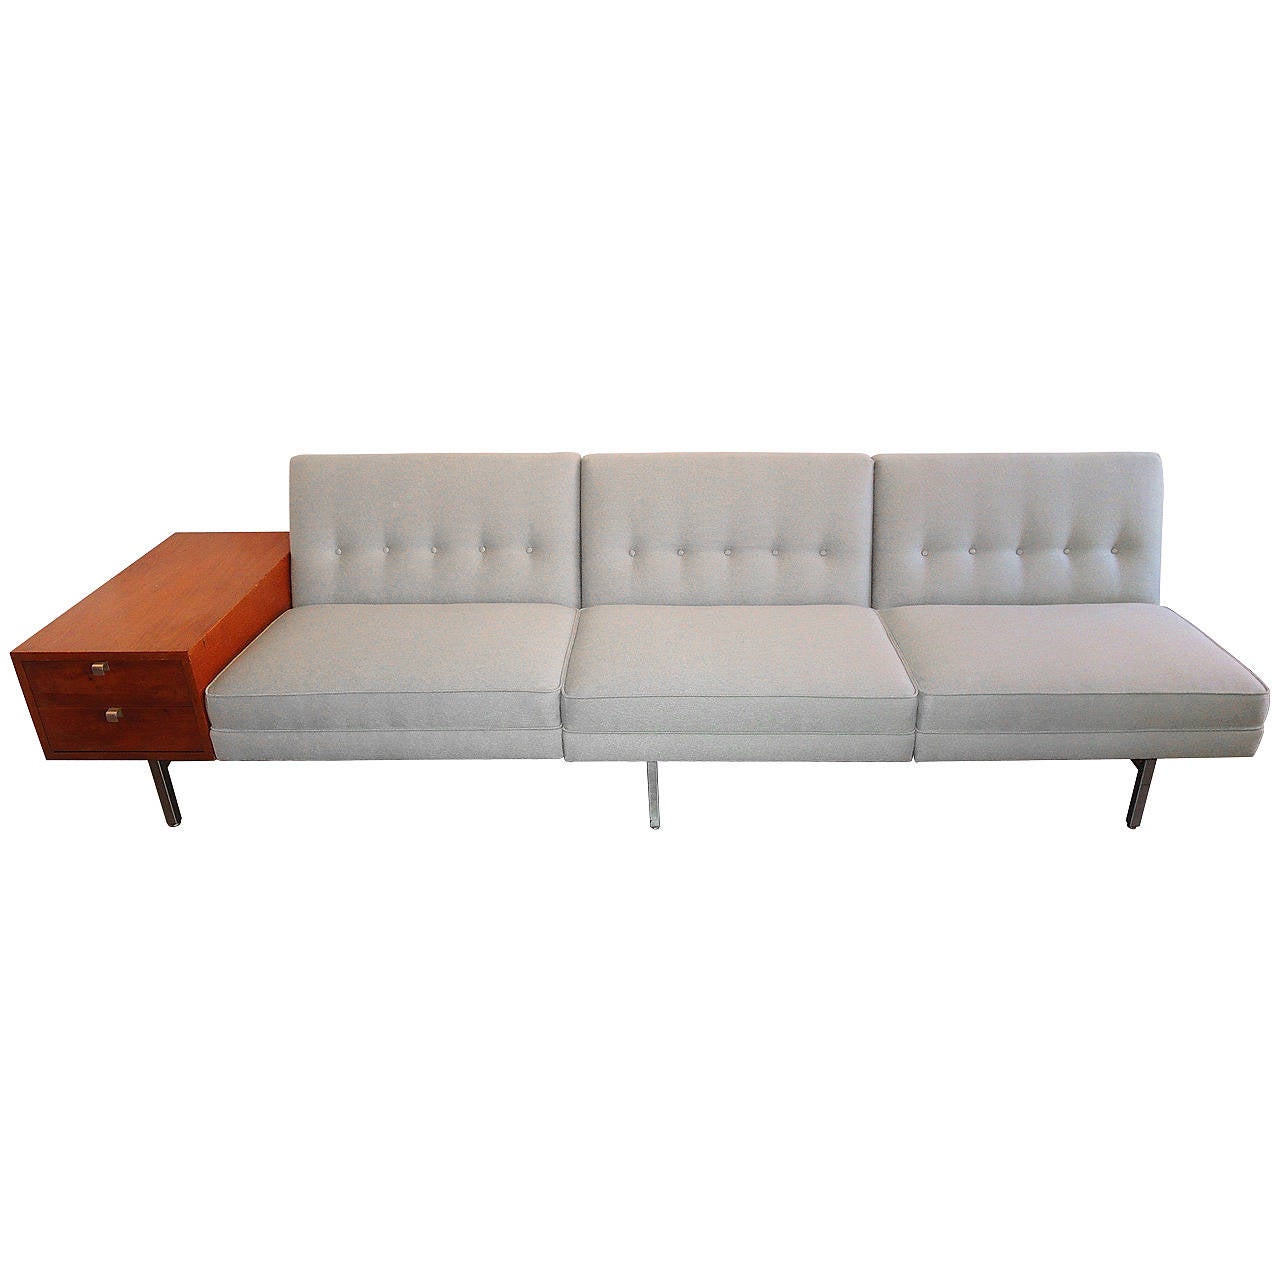 George Nelson Sofa For Herman Miller For Sale At 1stdibs